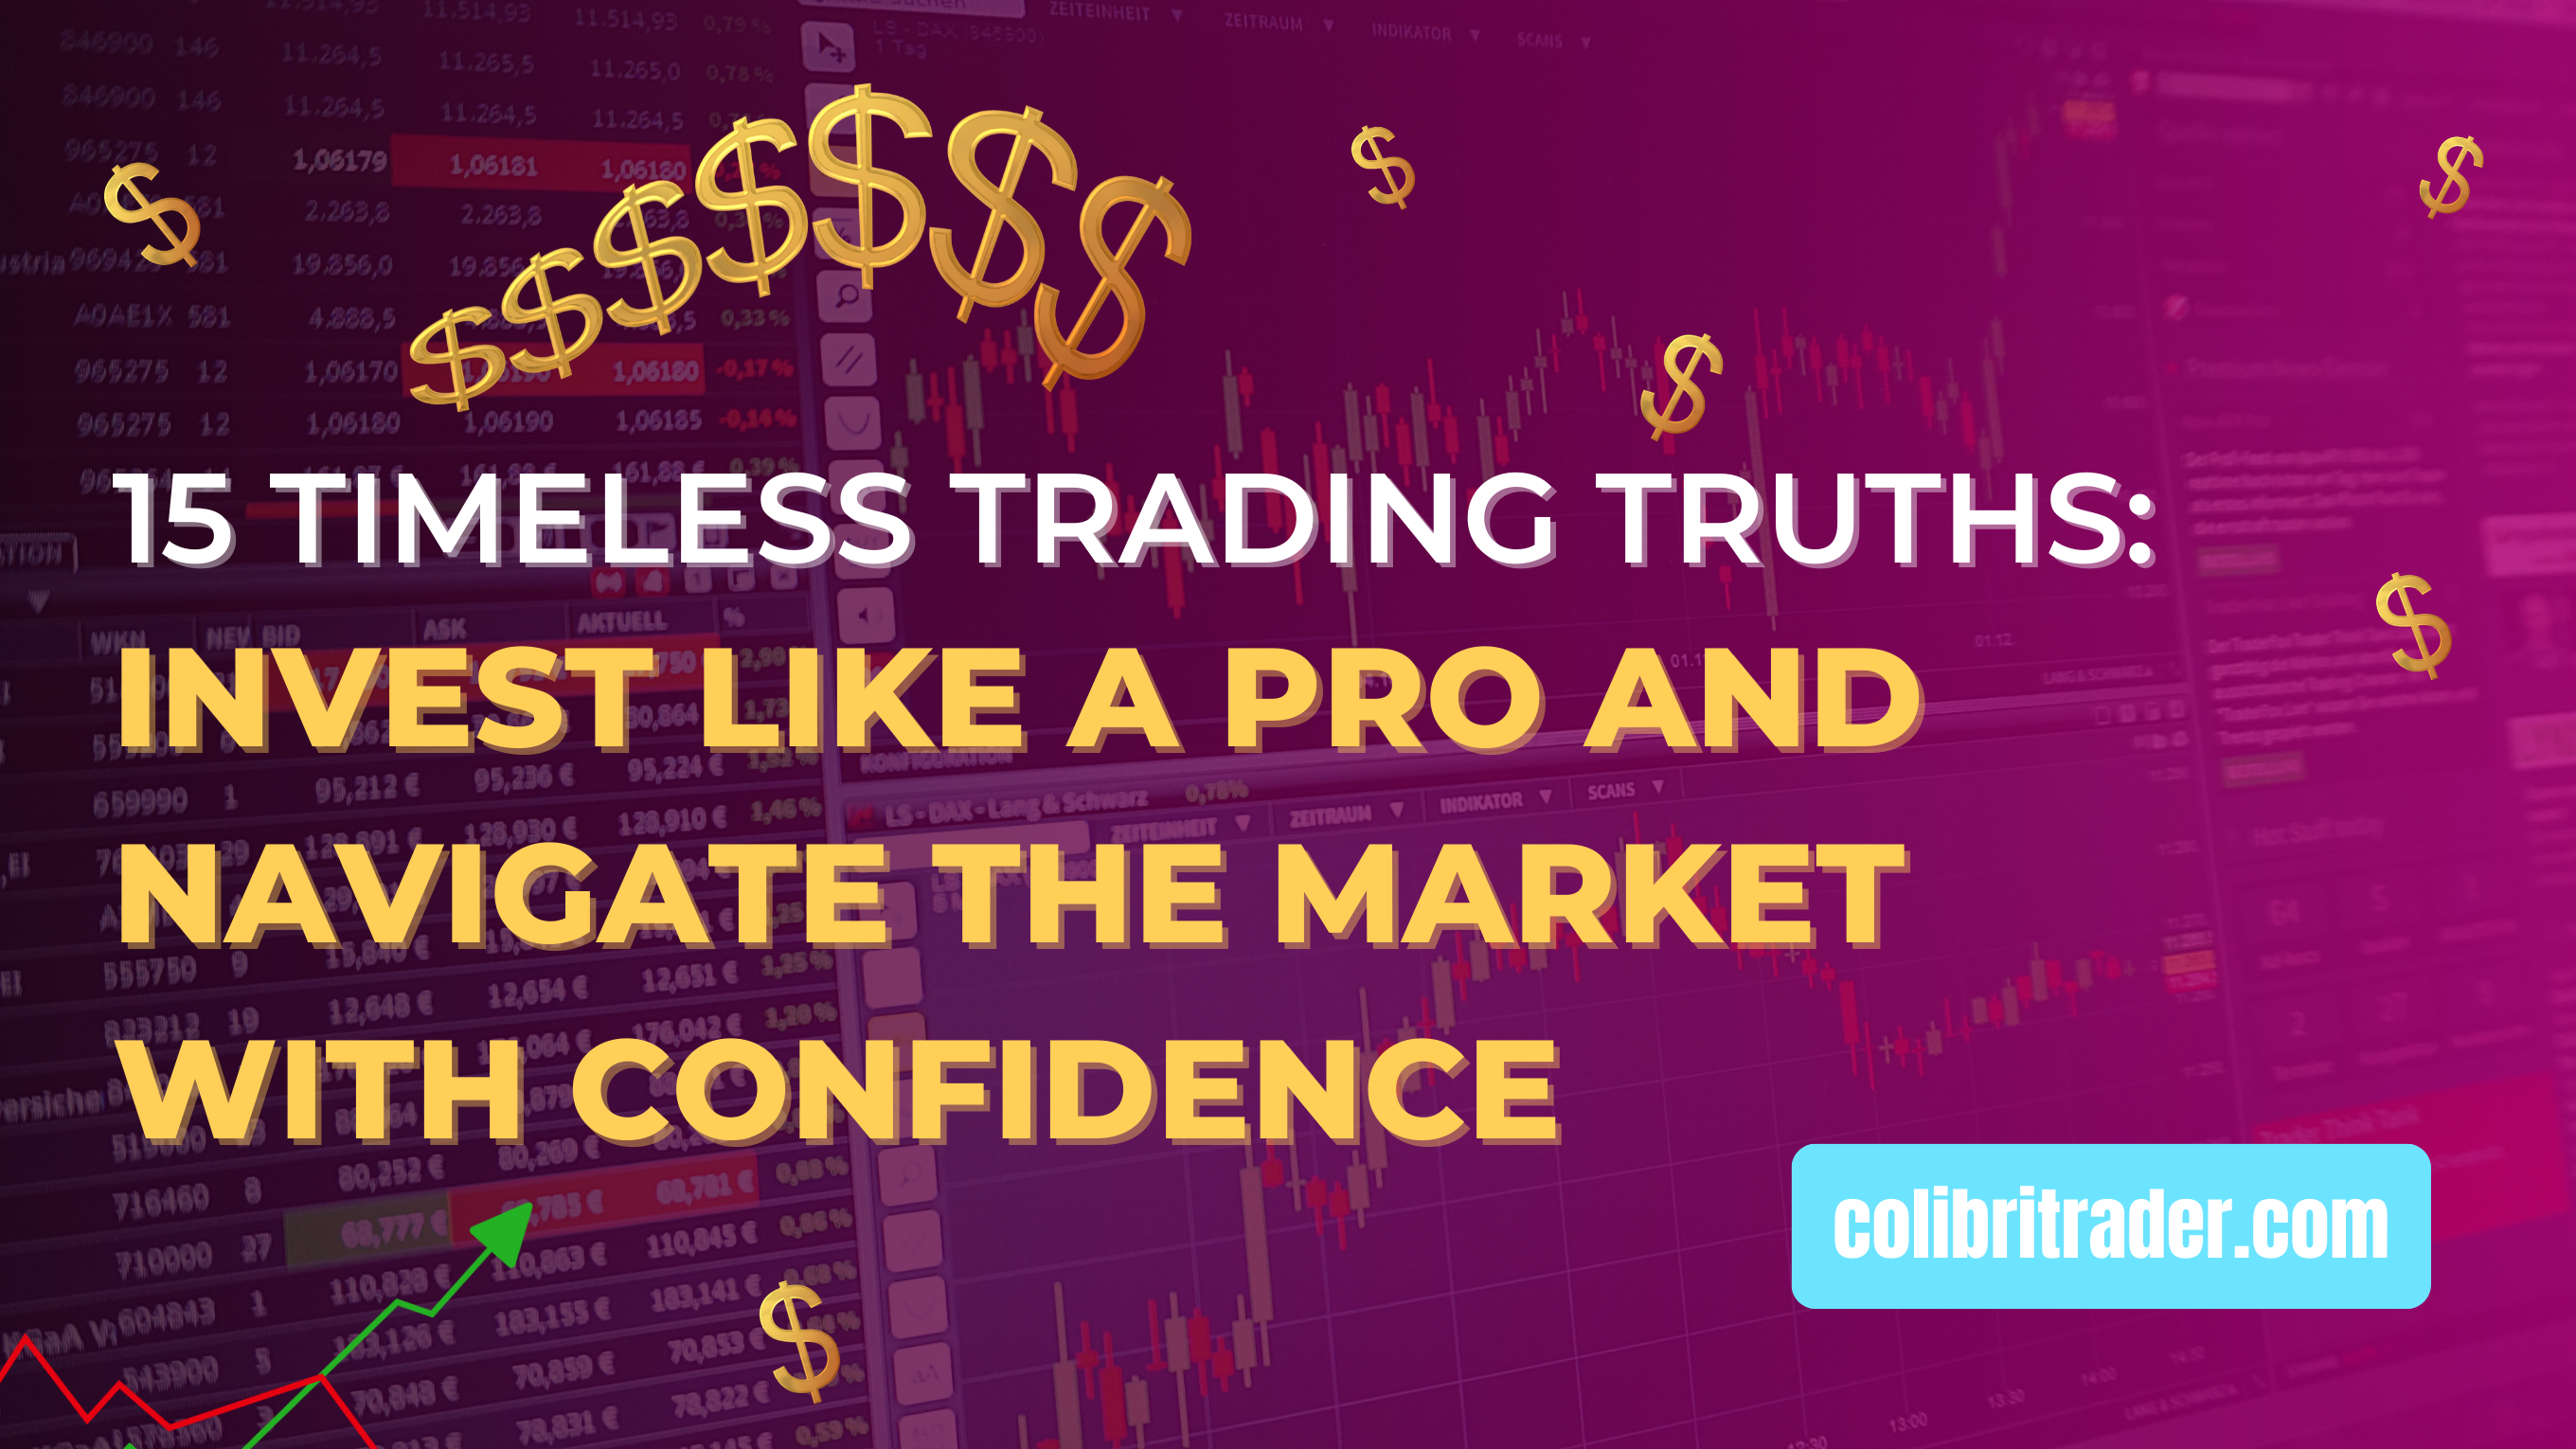 15 Timeless Trading Truths: Invest Like a Pro and Navigate the Market with Confidence